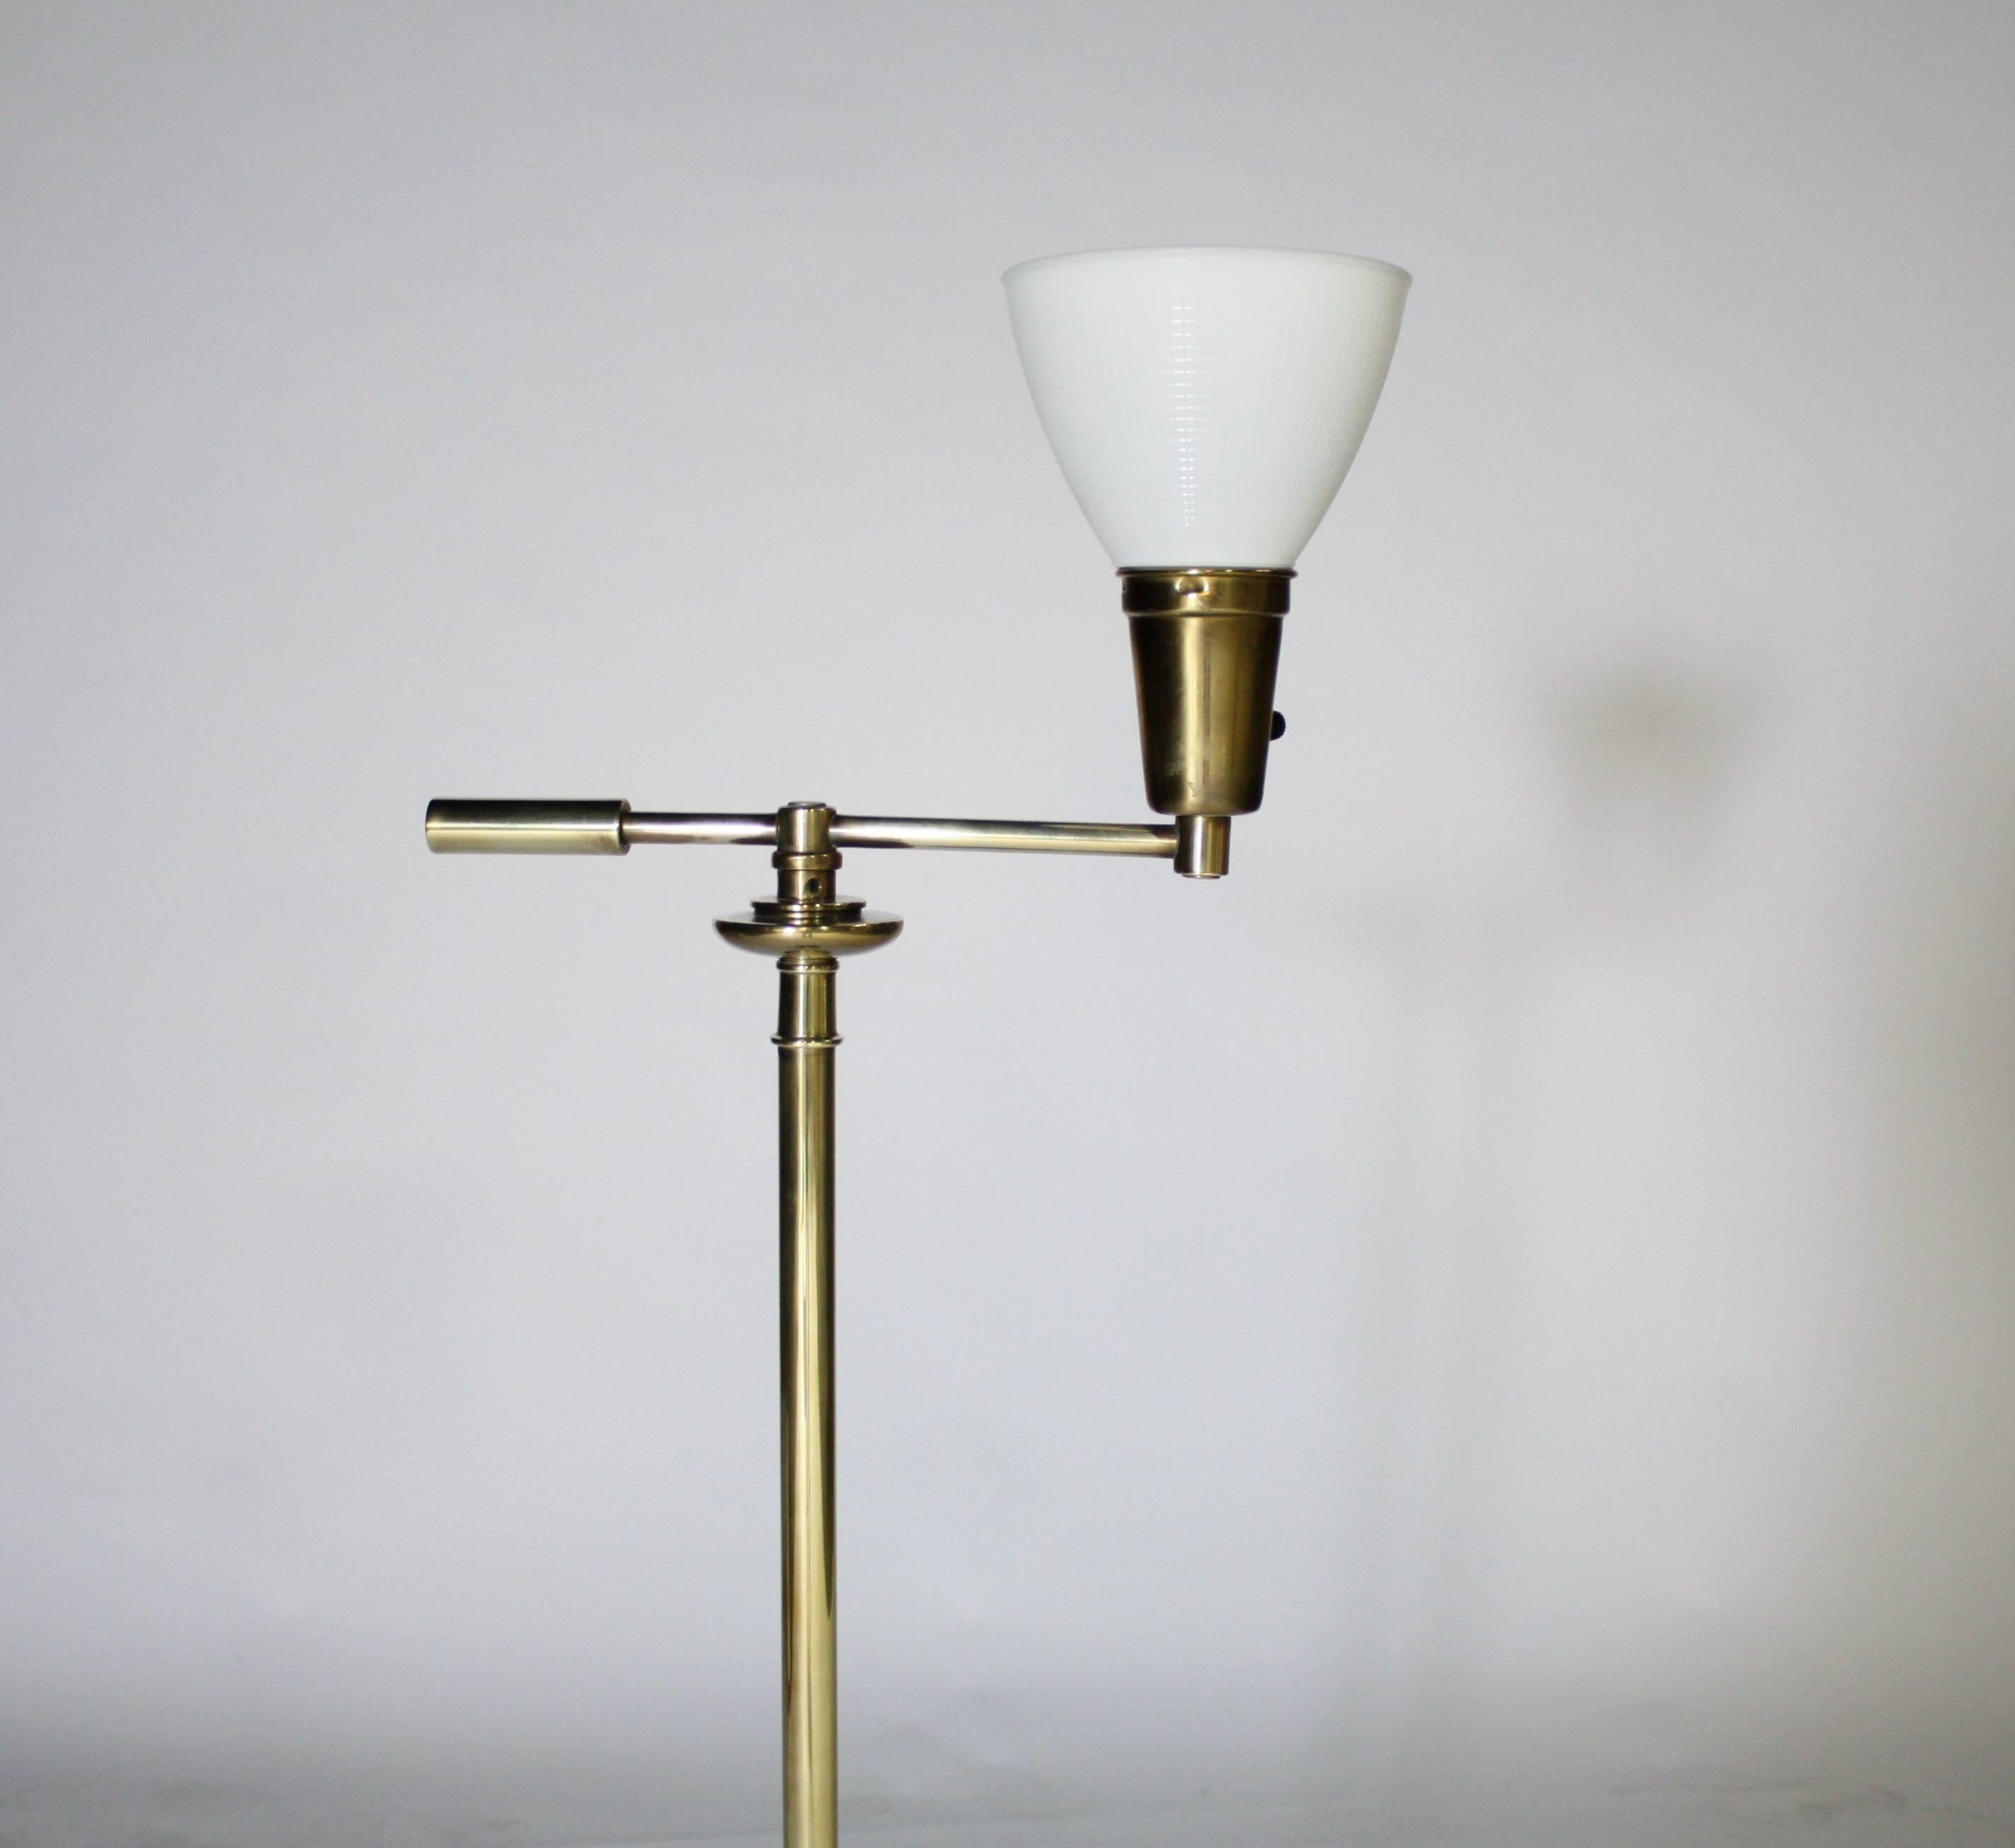 Vintage graduated brass ball floor lamp attributed to Tommi Parzinger by Stiffel. Hand polished with new cream color drum shade. Features Stiffel patent switch allows you to turn the lamp on and off by pushing down the long brass pole.